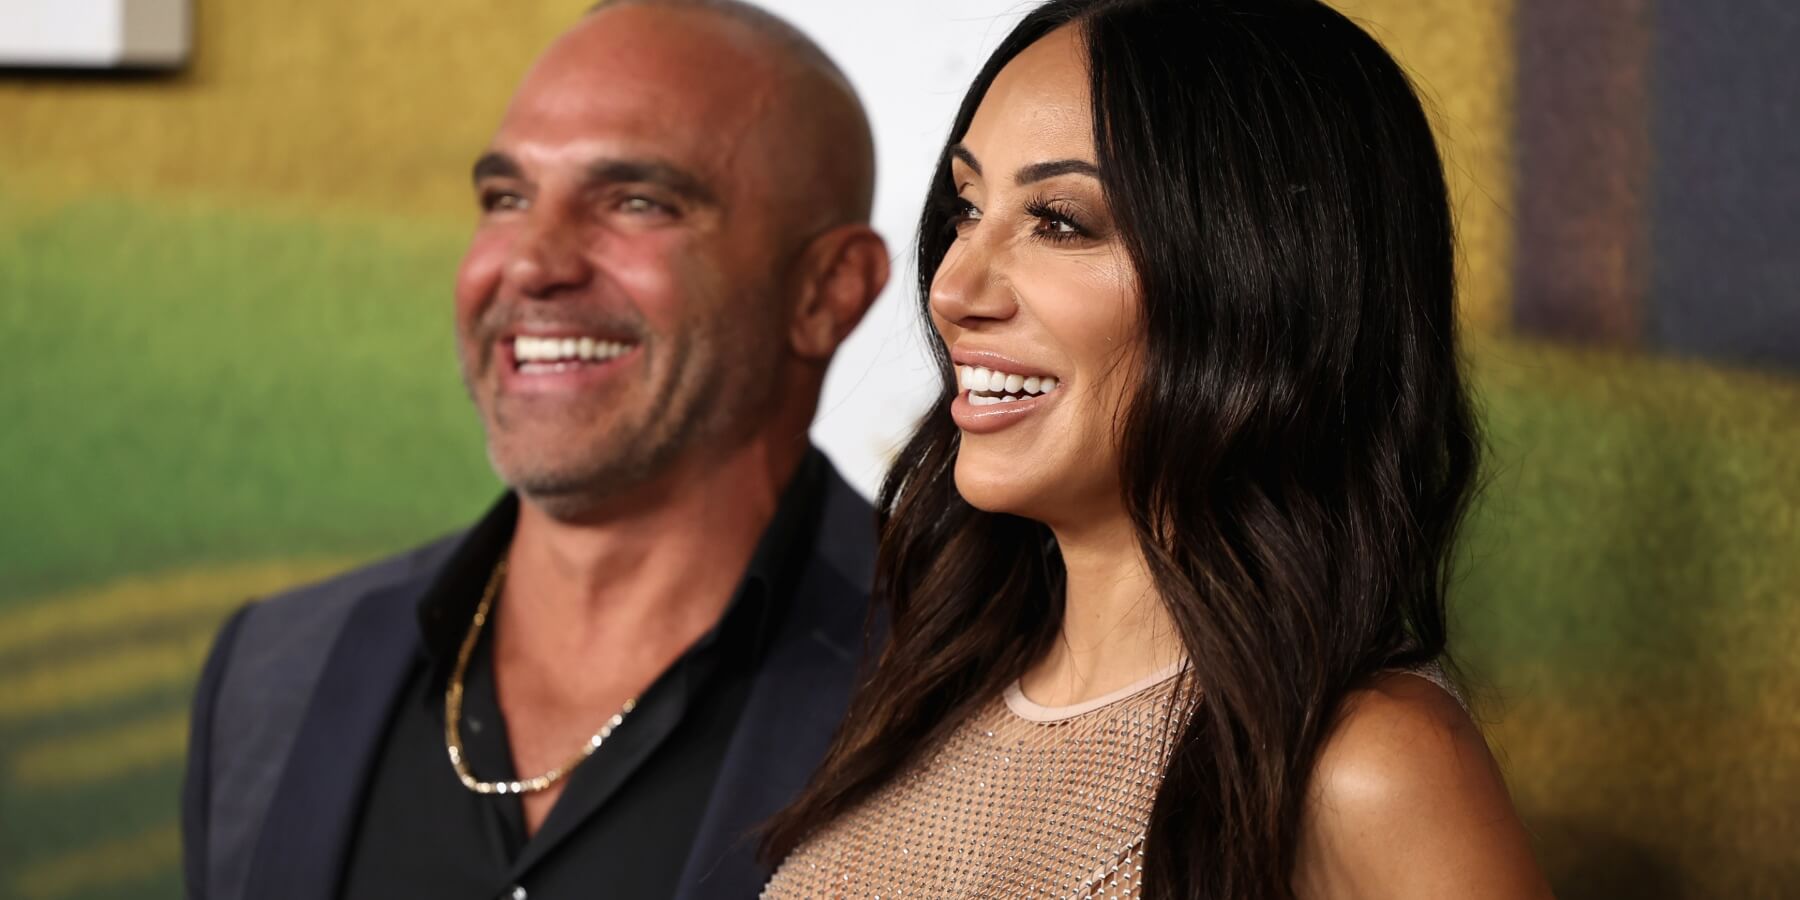 'Real Housewives of New Jersey' star Melissa Gorga was accused of having 'daddy issues' in her relationship with Joe Gorga by his sister Teresa Giudice.